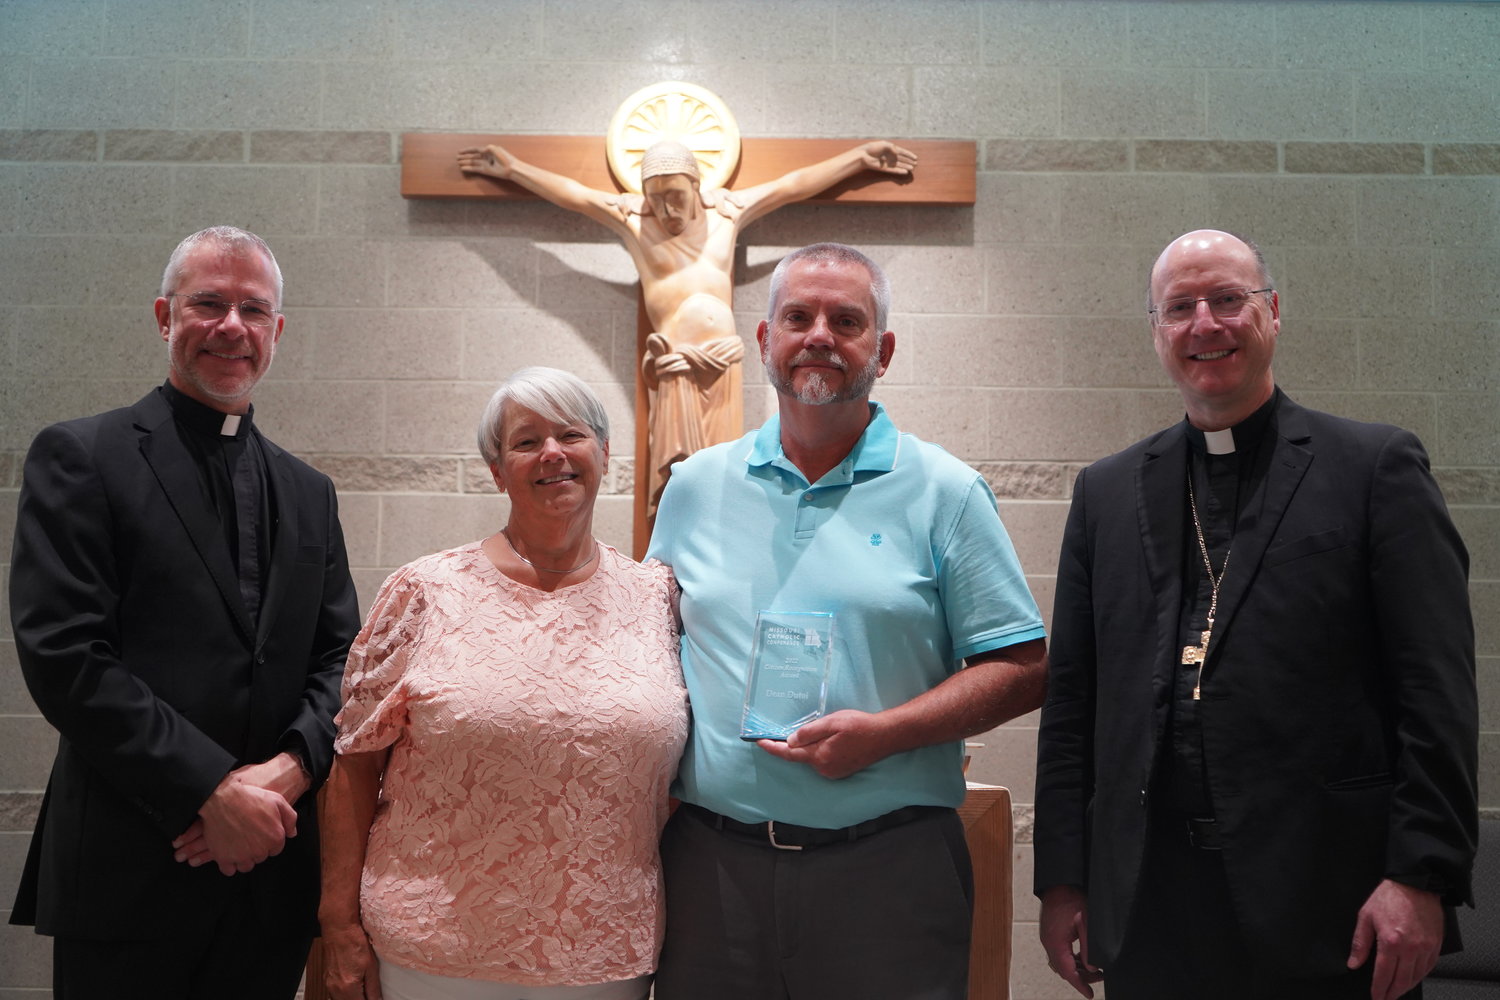 Father Jeremy Secrist, pastor of St. Peter Parish in Jefferson City, parishioners Carol and Dean Dutoi, and Bishop W. Shawn McKnight gather before the altar in the chapel of the Alphonse J. Schwartze Memorial Catholic Center in Jefferson City Aug. 30, after Bishop McKnight presented Mr. Dutoi the Missouri Catholic Conference’s 2022 Citizen Recognition Award for the Jefferson City diocese. Mr. Dutoi served for over a decade as president of St. Peter Parish’s conference of the St. Vincent de Paul Society.